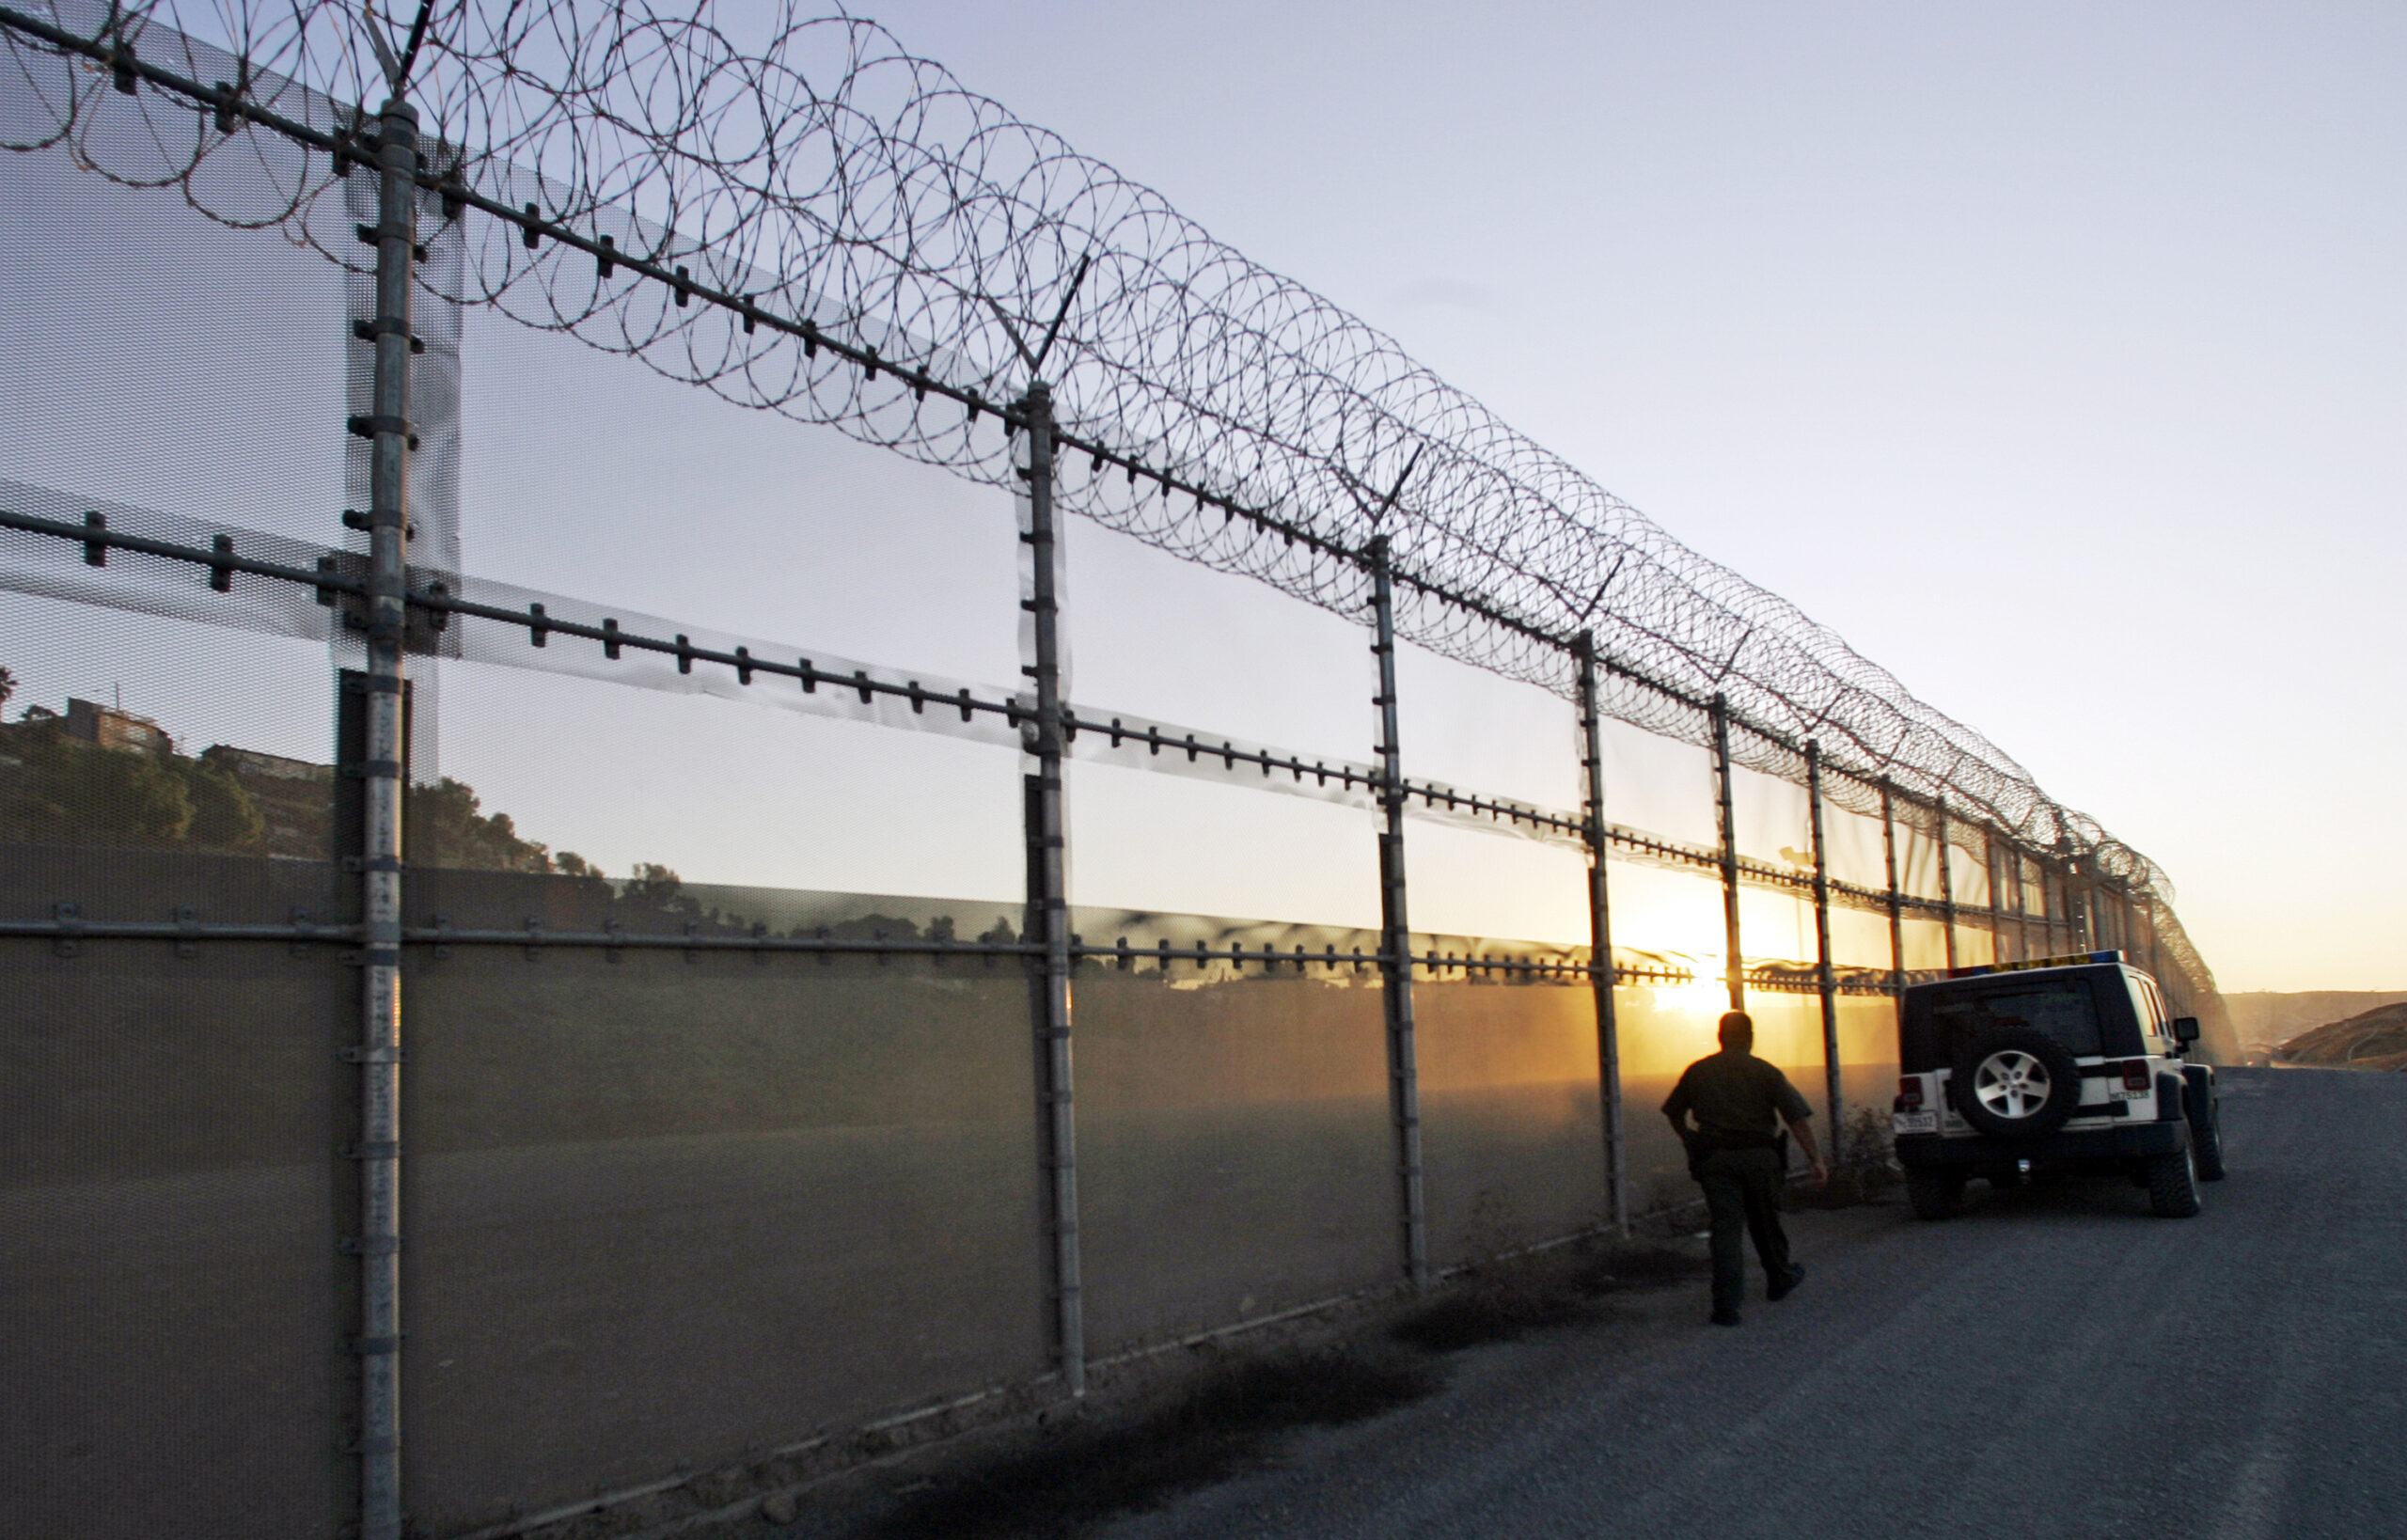 U.S. Border Patrol agent walking back to his vehicle along the border fence in San Diego, California.